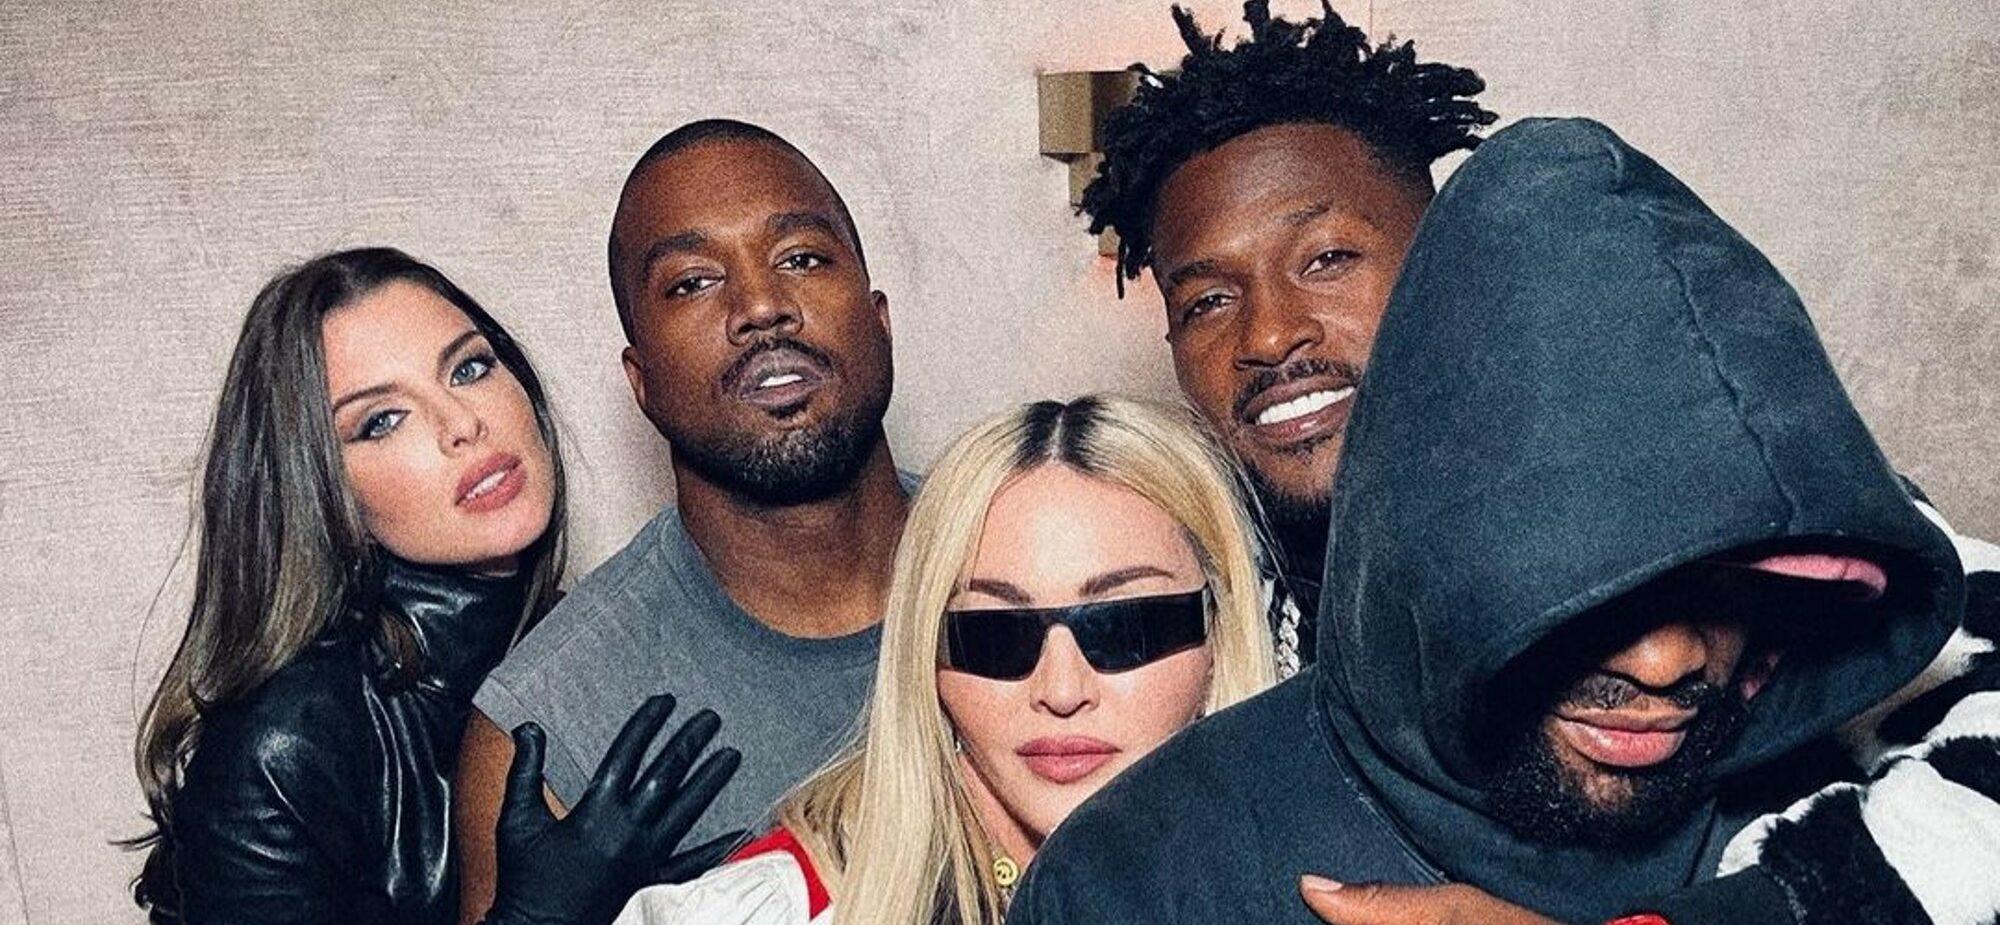 Julia Fox, Kanye West, Madonna, Antonio Brown, and Floyd Mayweather hanging out.